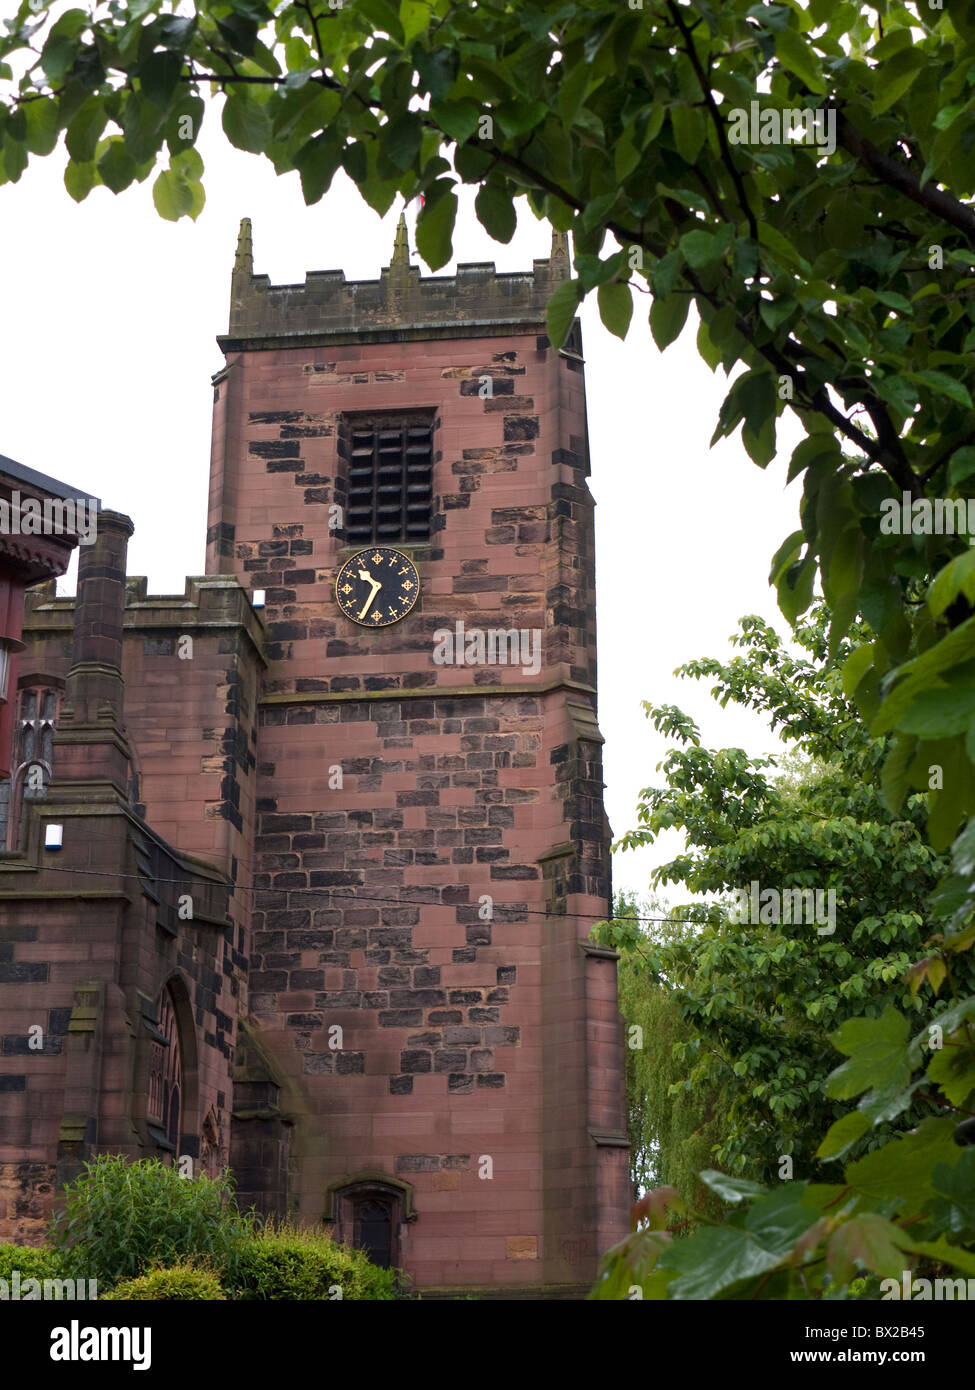 The Parish Church of Mary the Virgin in the Town of Eccles in Salford in the Greater Manchester Area Stock Photo